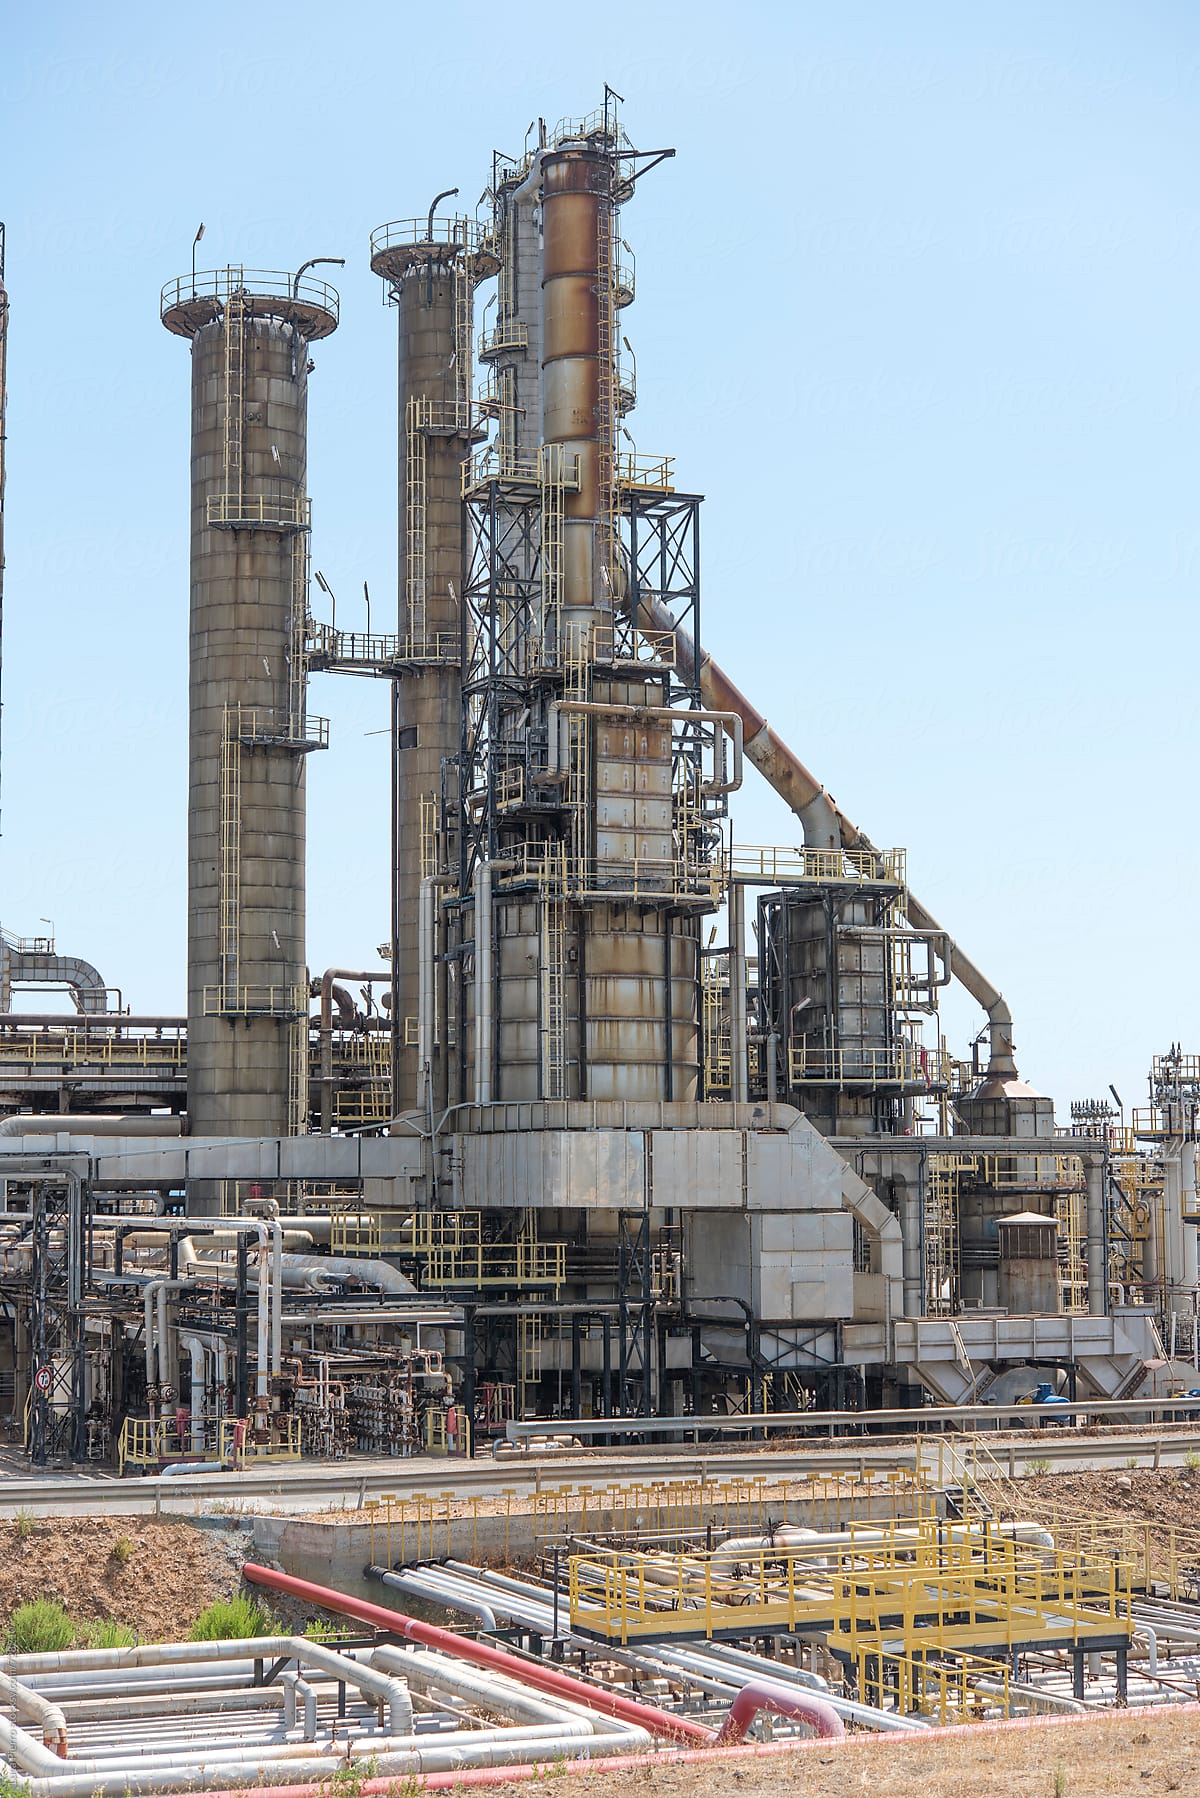 Oil and gas refinery, pipelines and towers, heavy industry